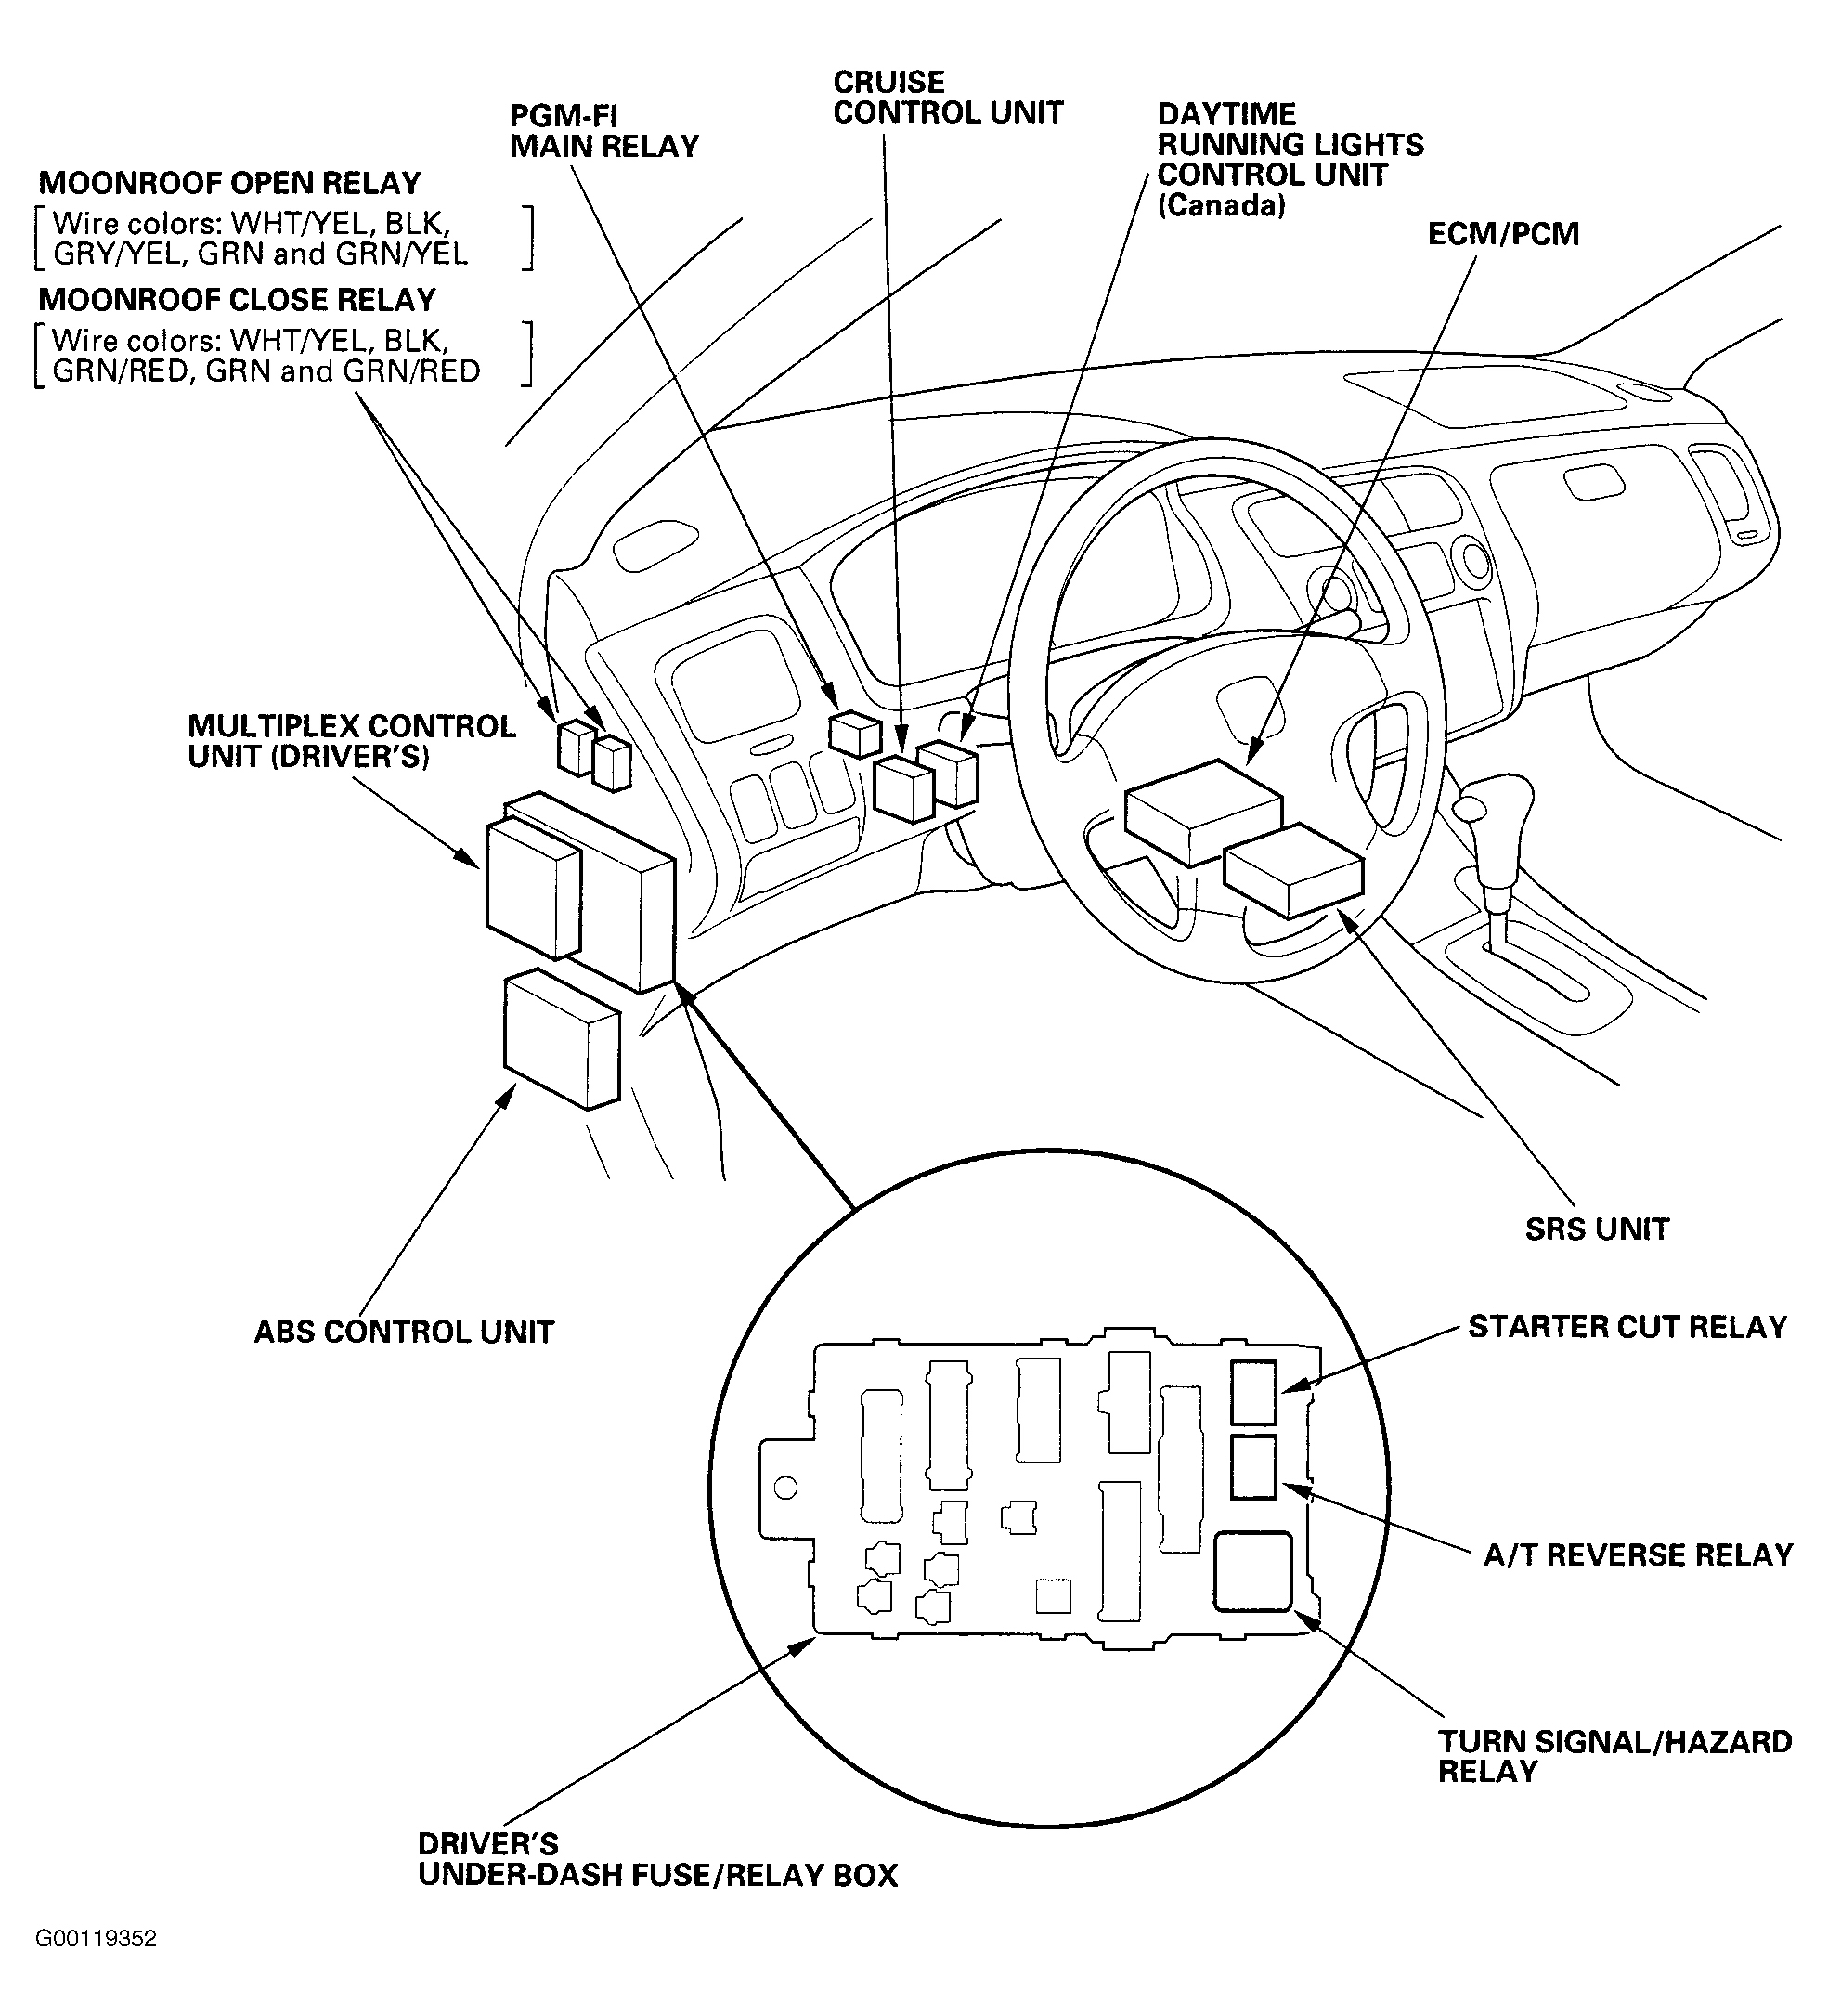 Honda Accord LX 2000 - Component Locations -  Locating Drivers Under-Dash Fuse/Relay Box (4-Cylinder)